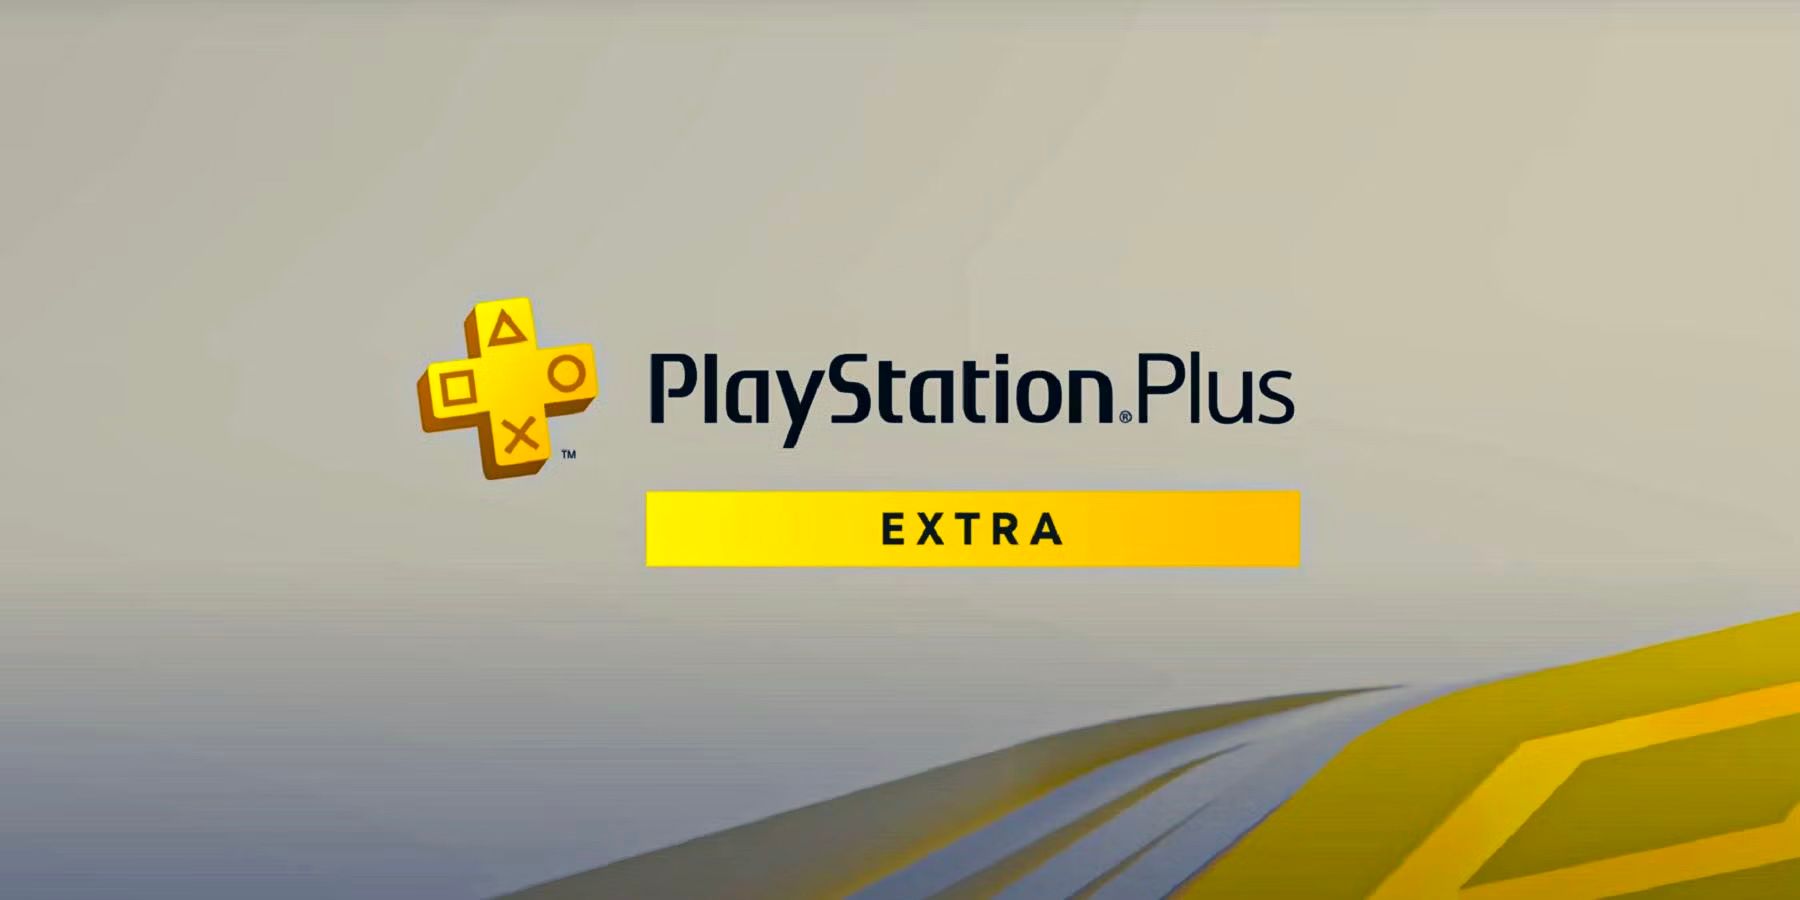 PlayStation Plus subscribers 2023